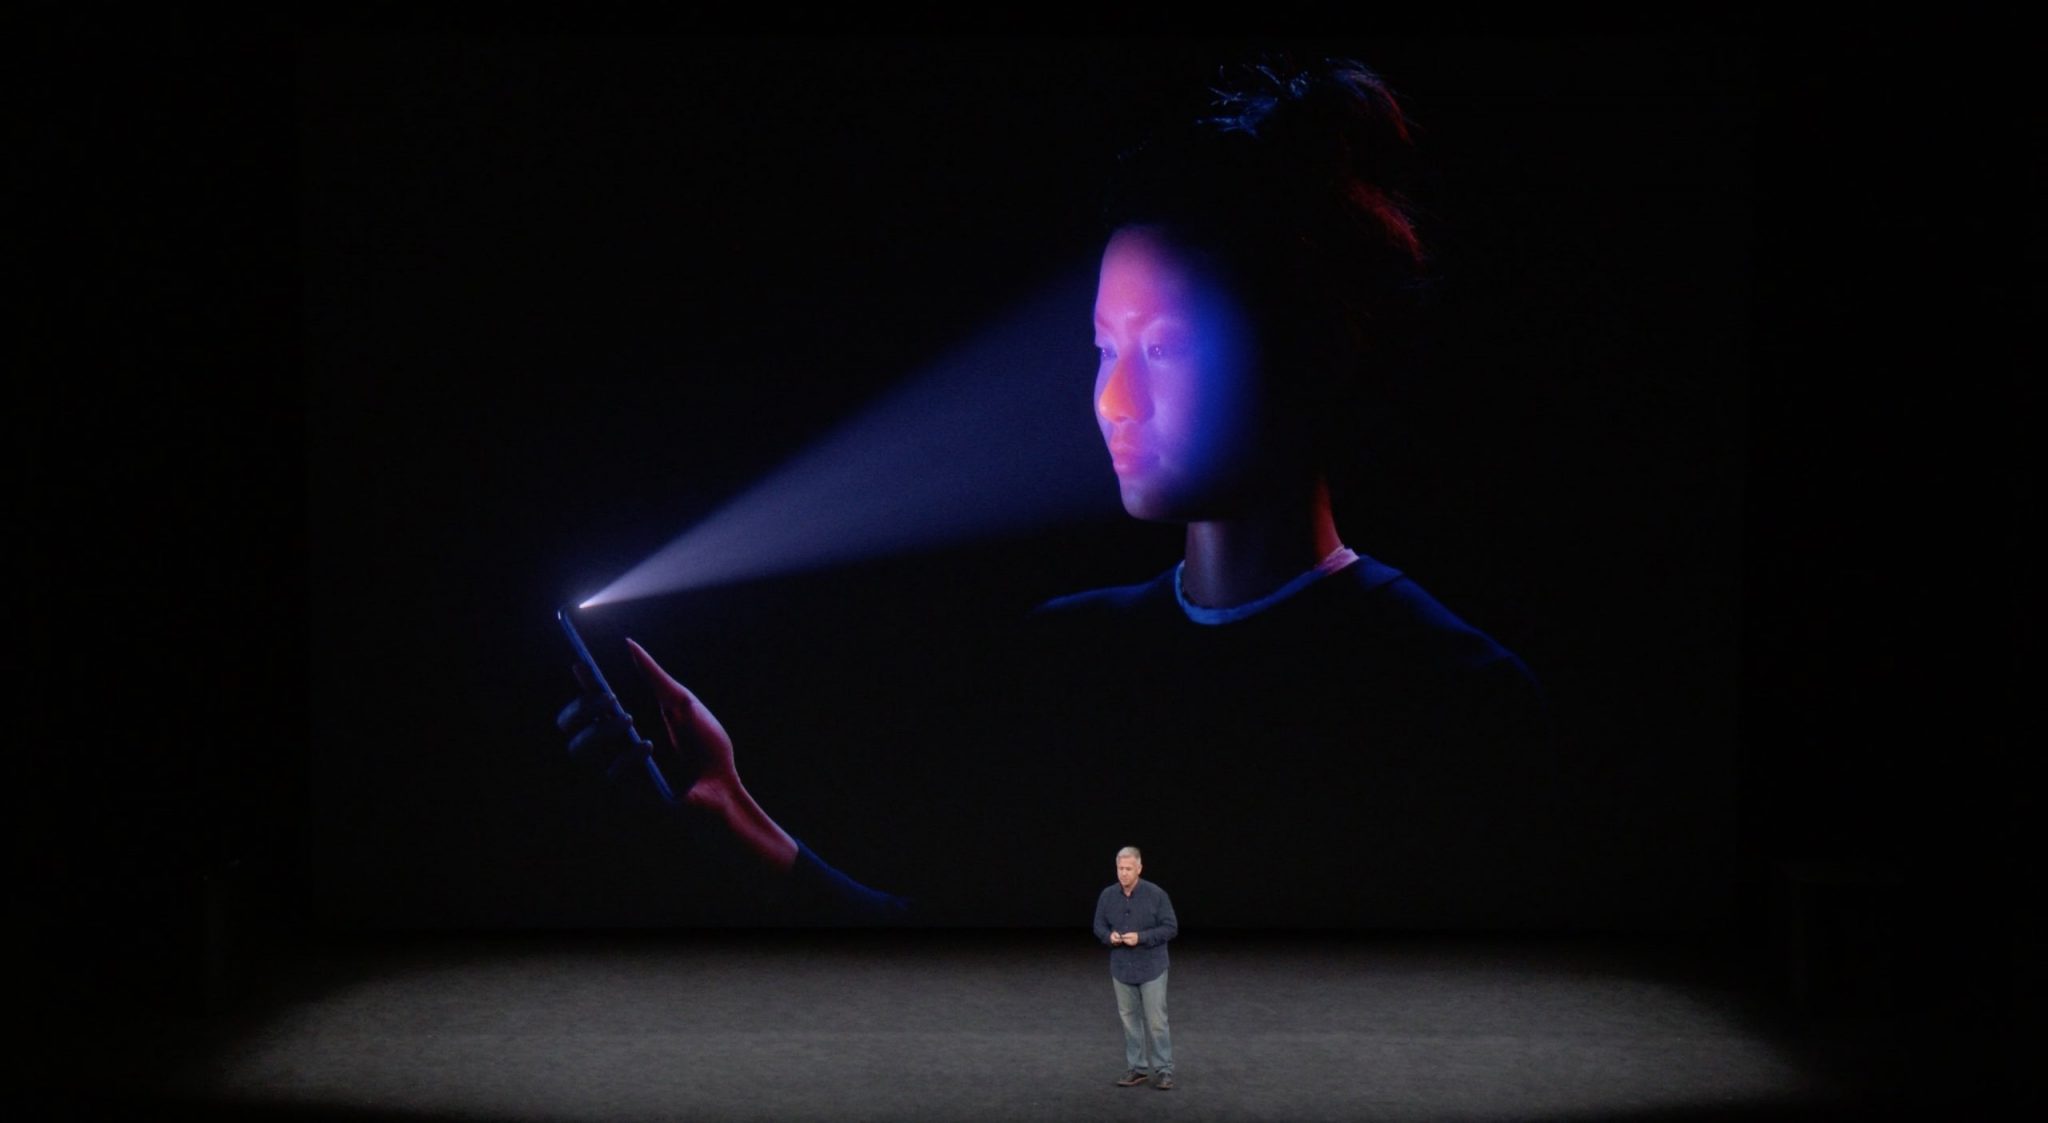 Face ID Review: Setup, Operation, Security, Privacy & Vulnerabilities